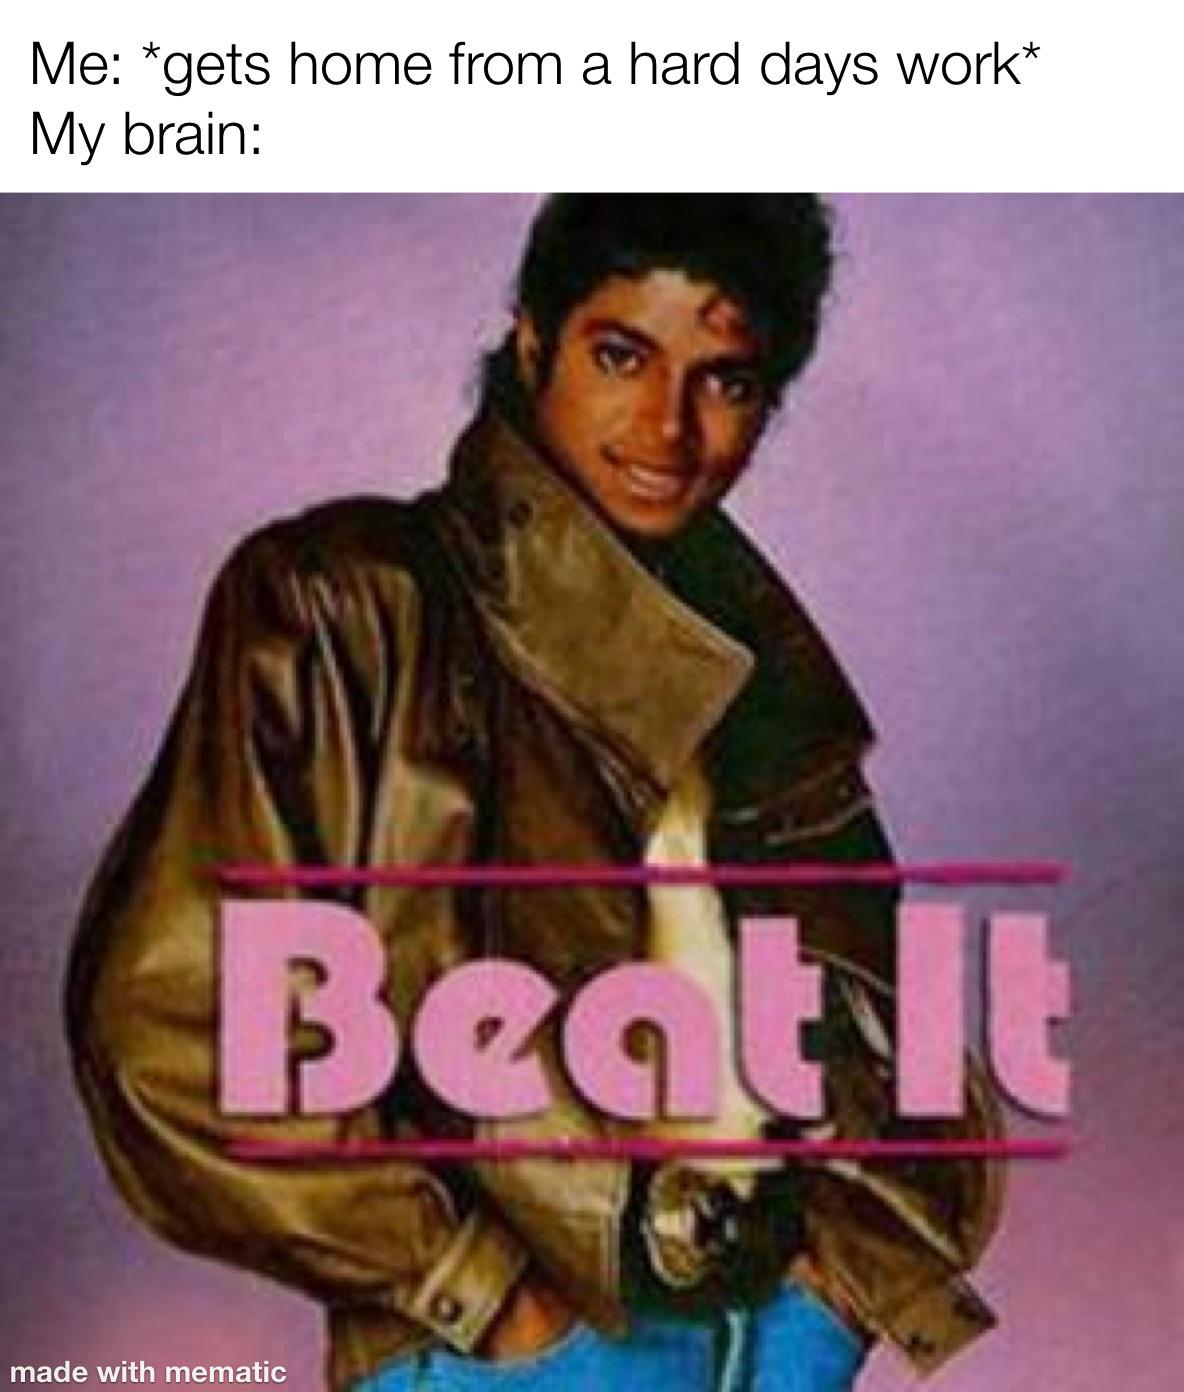 michael jackson 80s style - Me gets home from a hard days work My brain Bedt at made with mematic